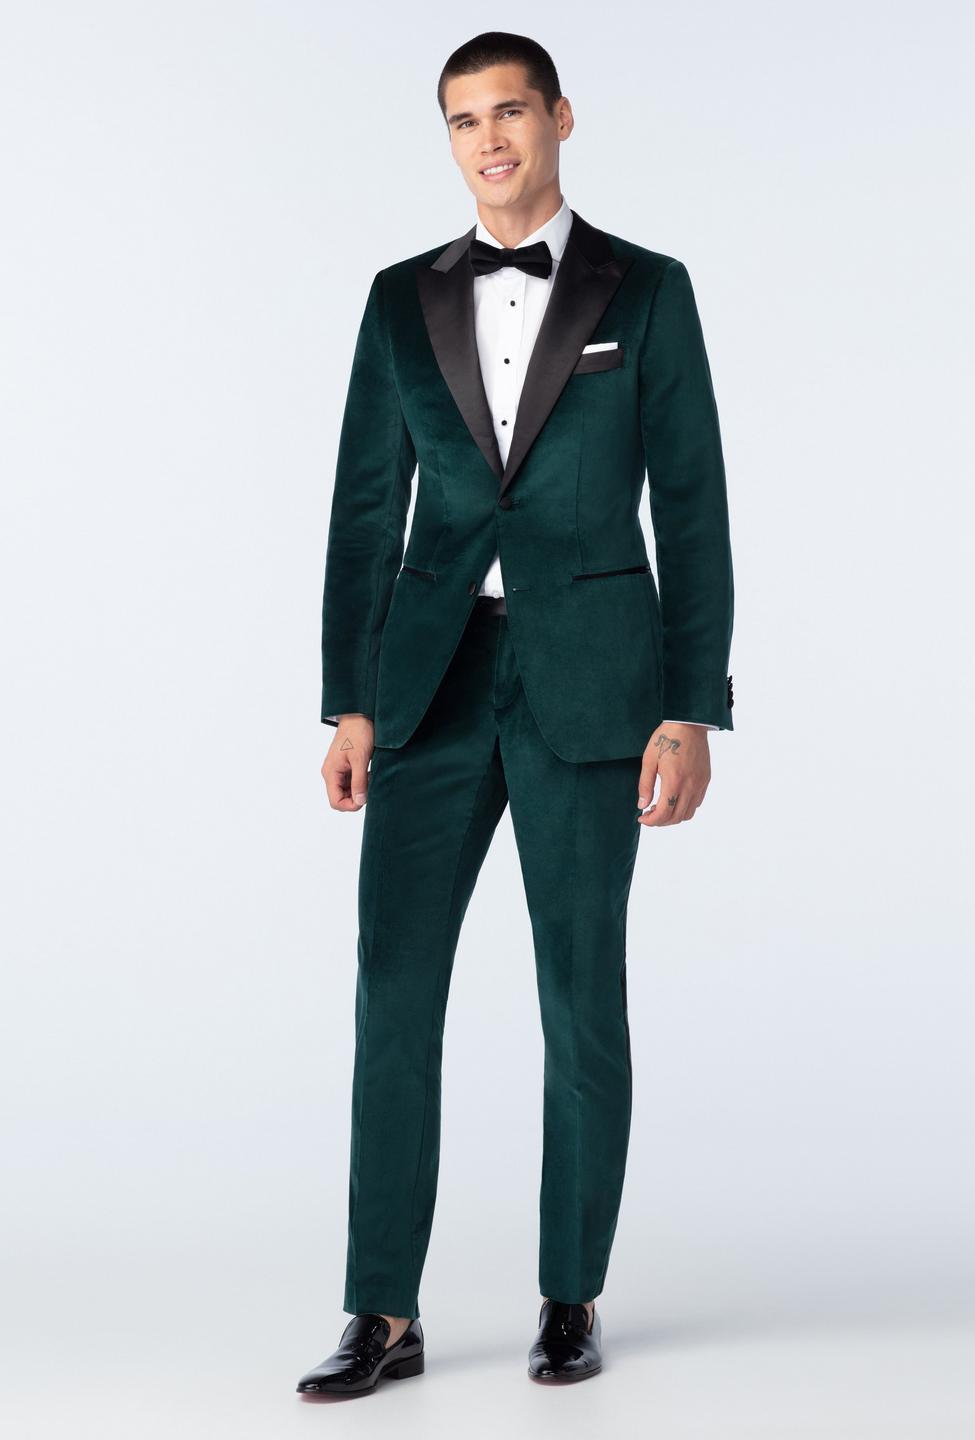 Green suit - Hardford Solid Design from Tuxedo Indochino Collection